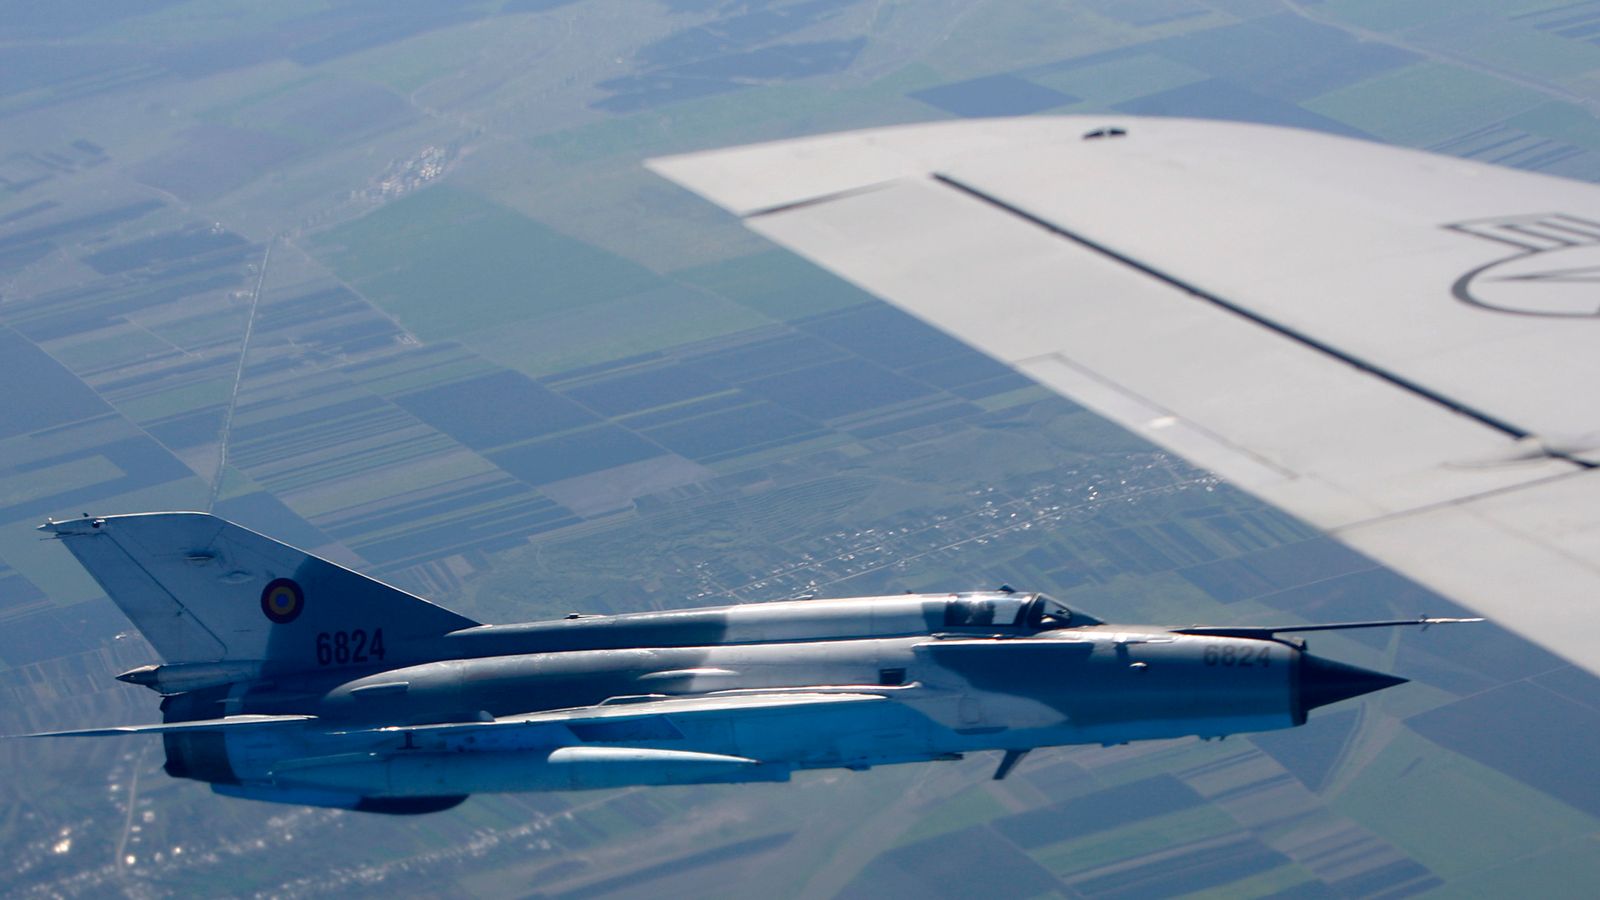 Romania scrambles fighter jets after detecting suspicious 'weather balloon' in its airspace